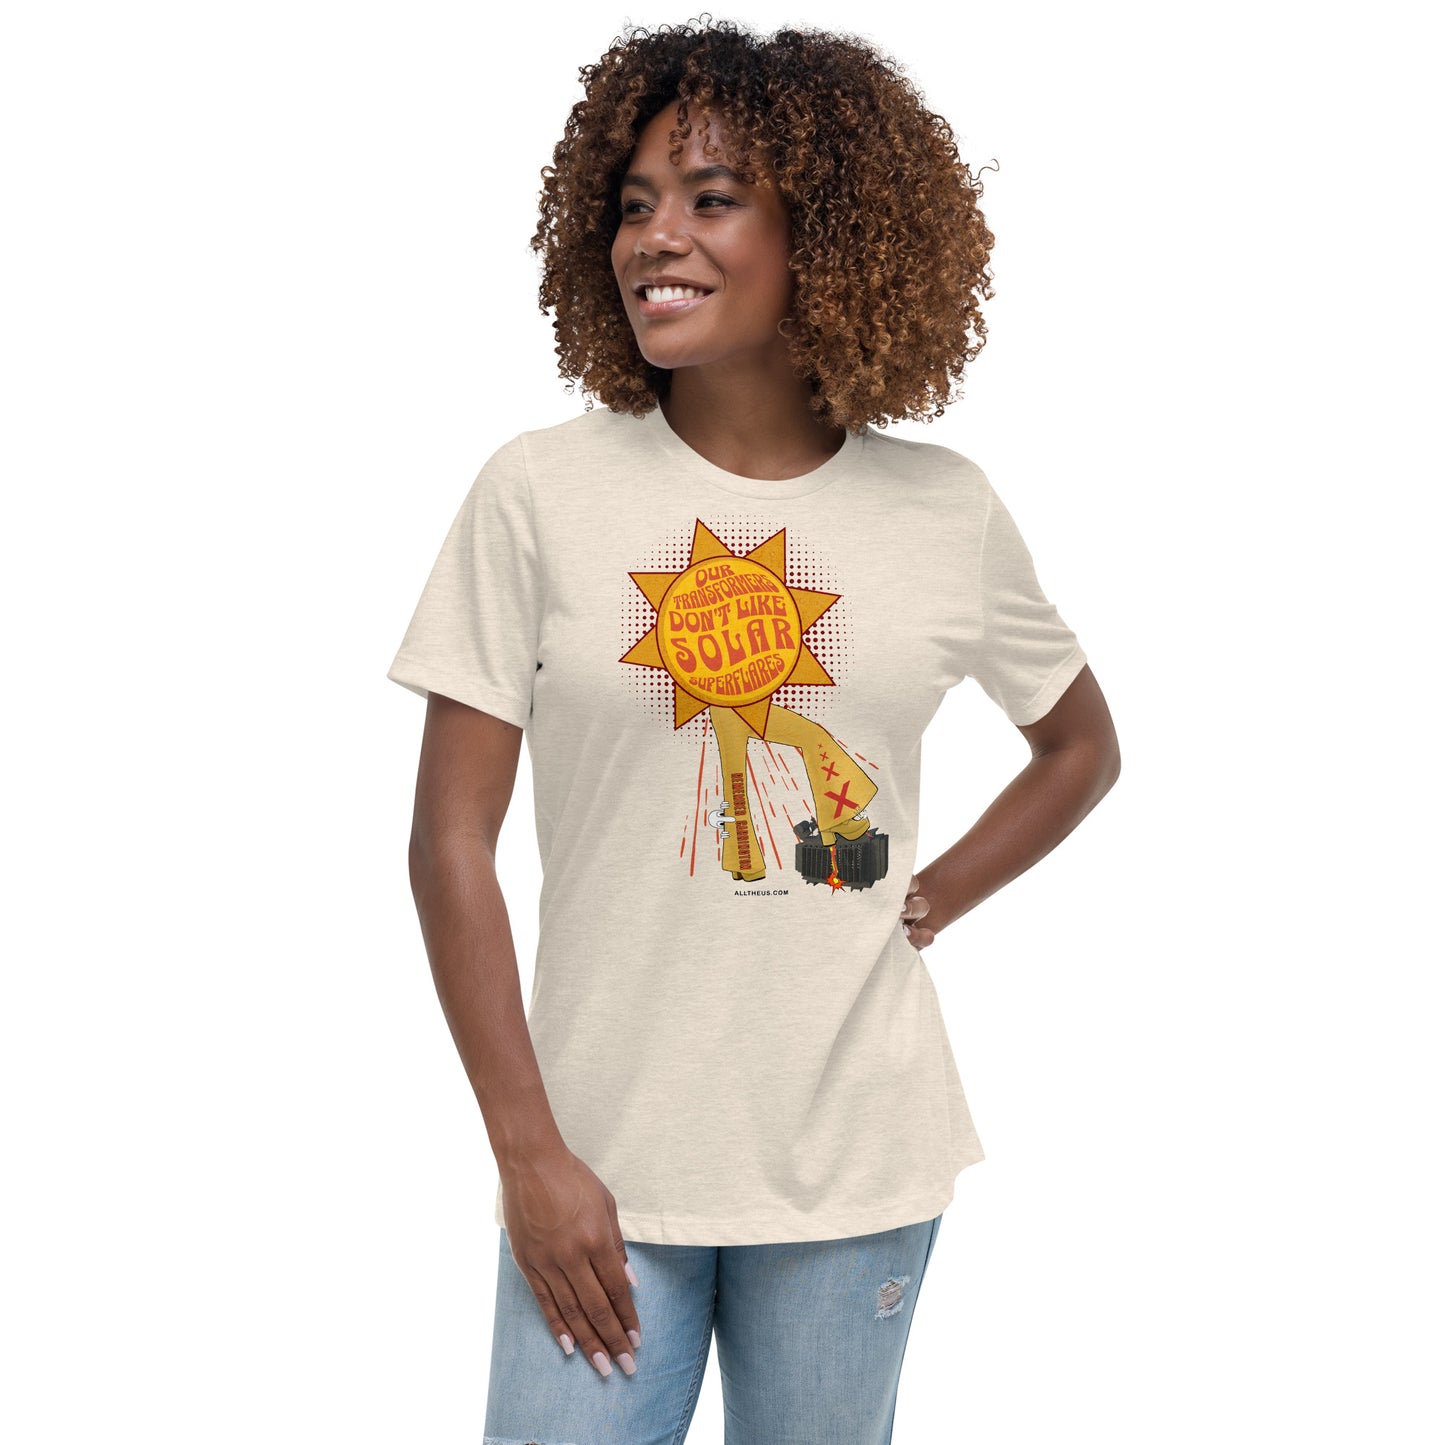 Women's Relaxed T-Shirt - Our Transformers Don't Like Superflares!